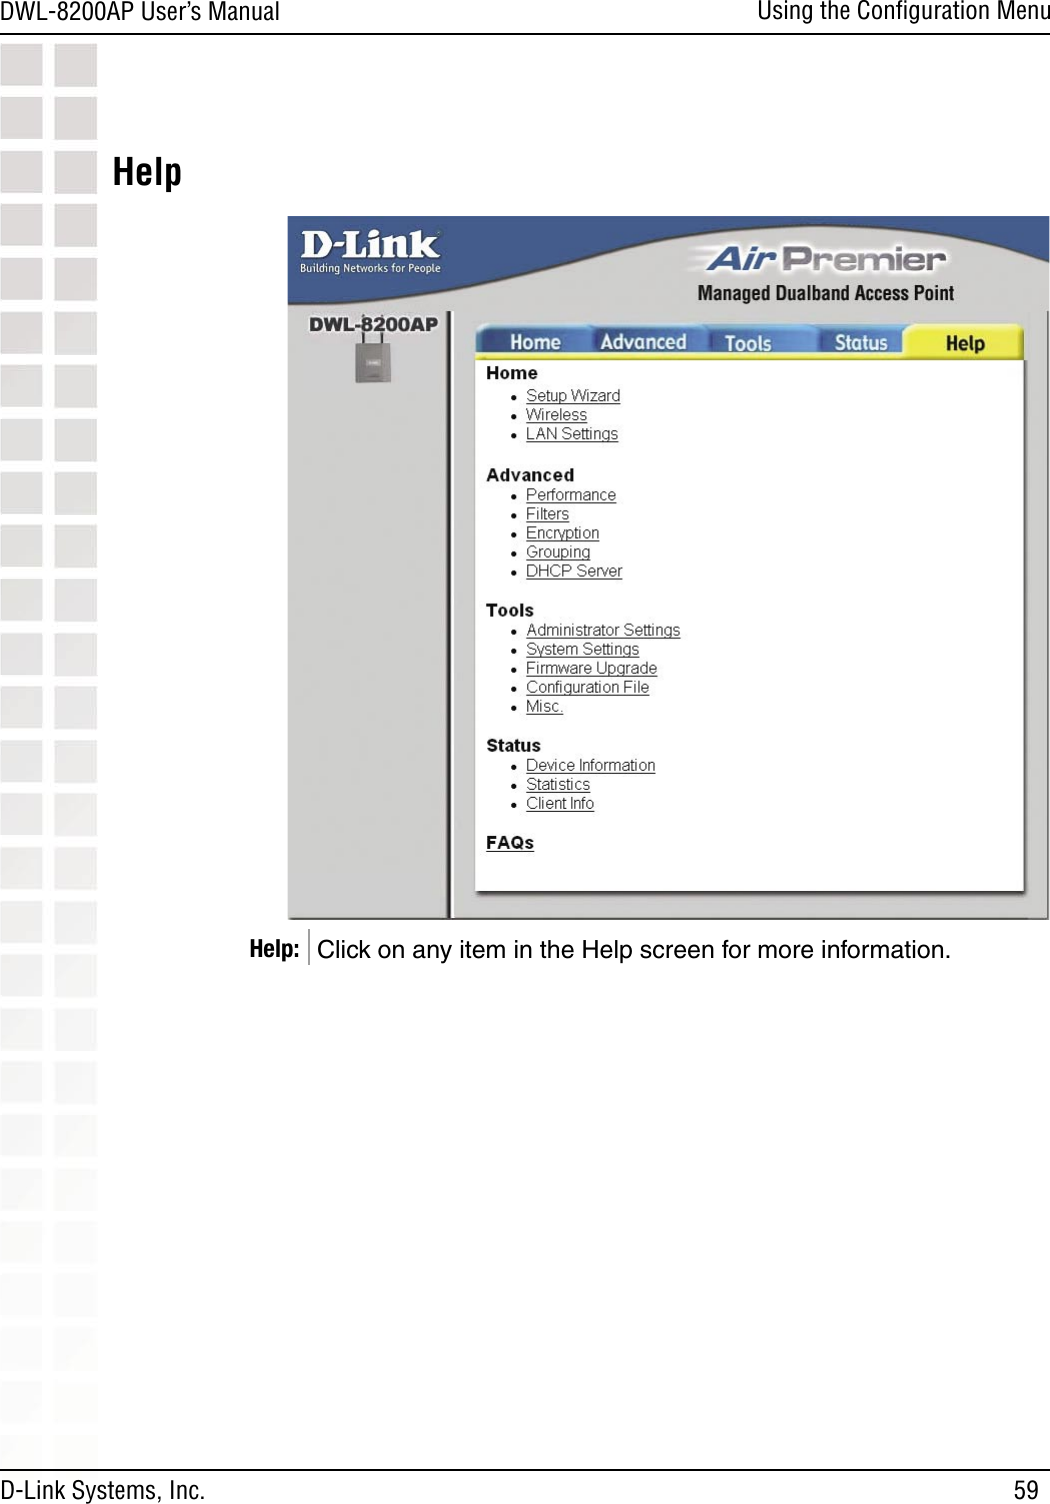 59DWL-8200AP User’s ManualD-Link Systems, Inc.Using the Conﬁguration MenuHelpClick on any item in the Help screen for more information.Help: